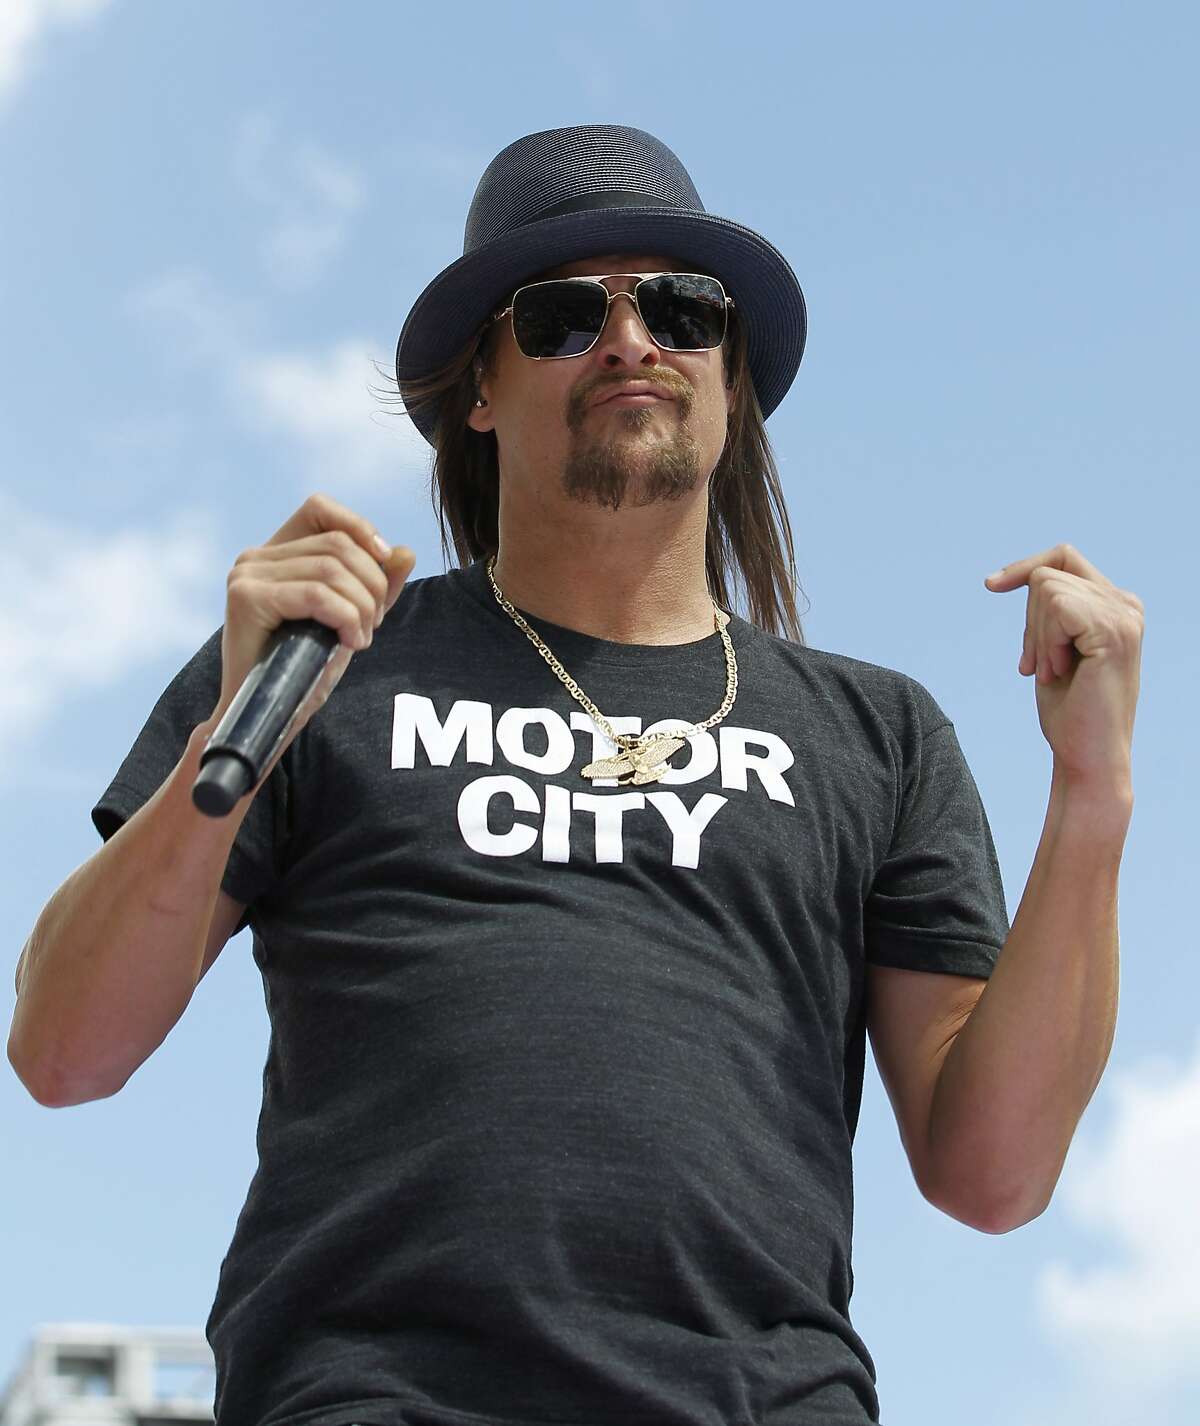 FILE - In this Feb. 22, 2015 file photo, Kid Rock performs before the Daytona 500 NASCAR Sprint Cup series auto race at Daytona International Speedway in Daytona Beach, Fla. The musician from suburban Detroit is teasing his potential 2018 U.S. Senate candidacy, though it is news to Michigan Republicans. Kid Rock, who was born Robert Ritchie, said Wednesday, July 12, 2017, that a website hinting at his campaign �www.kidrockforsenate.com � is legit. (AP Photo/Terry Renna, File)